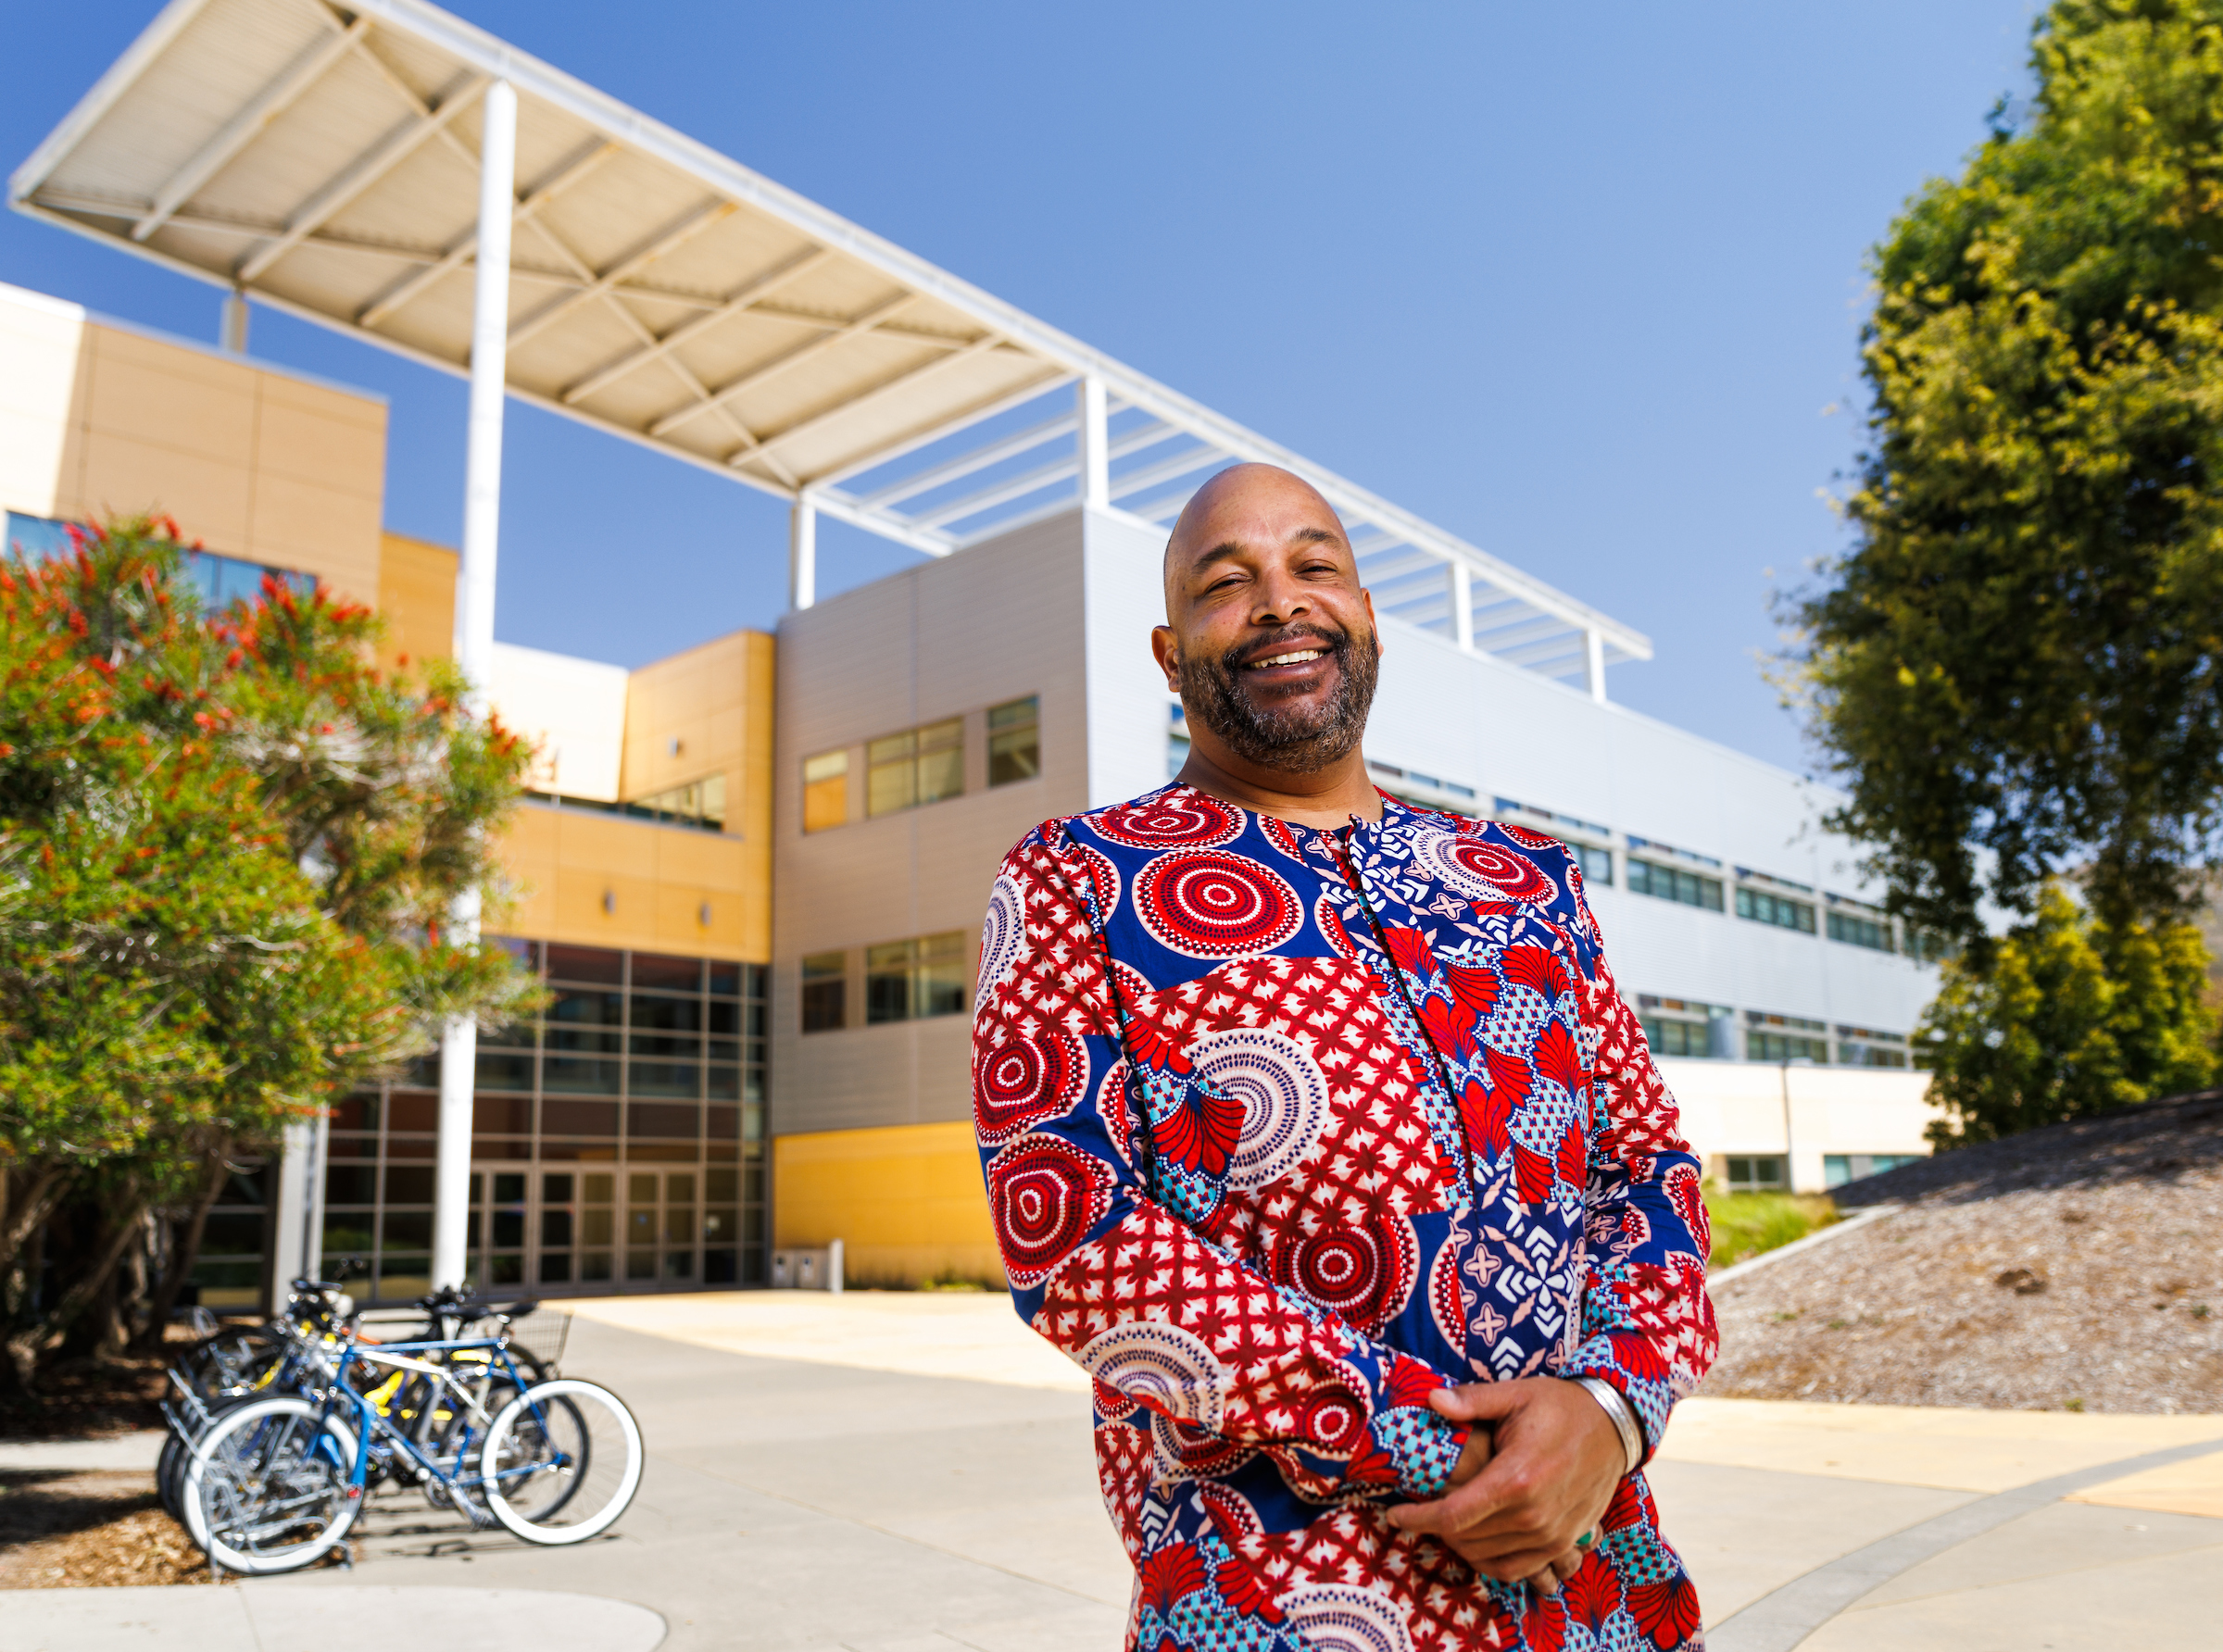 Recent engineering graduate Jon Gausman wears colorful clothing and smiles in a portrait taken on campus.